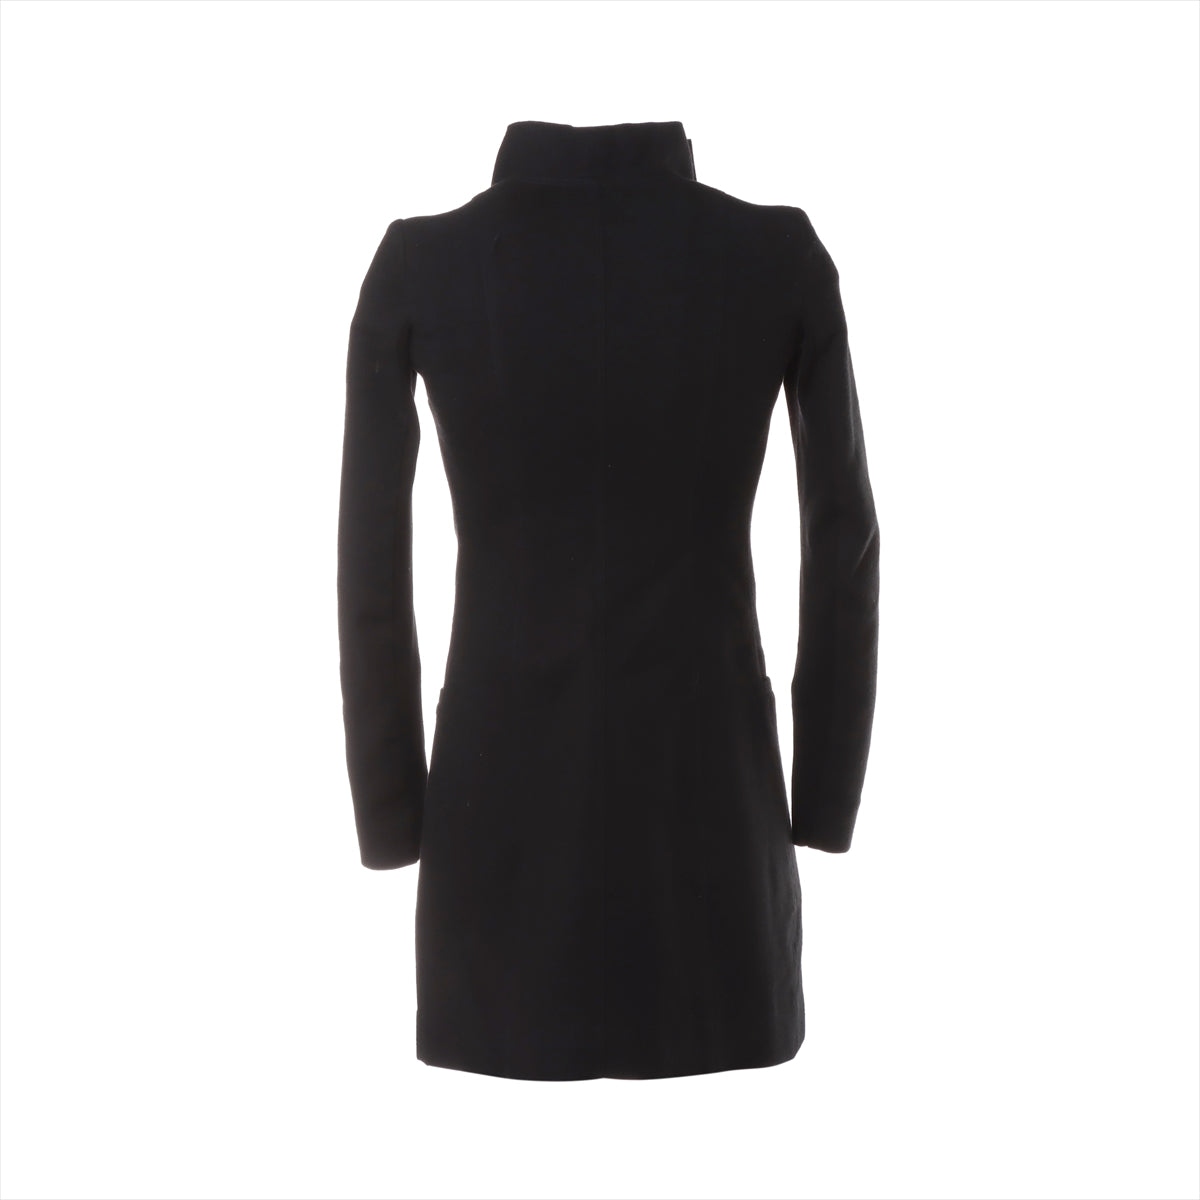 Rick Owens 16AW Wool coats I42 Black  RP16F2934 tube way coat Hem lining There are threads on cuffs etc.